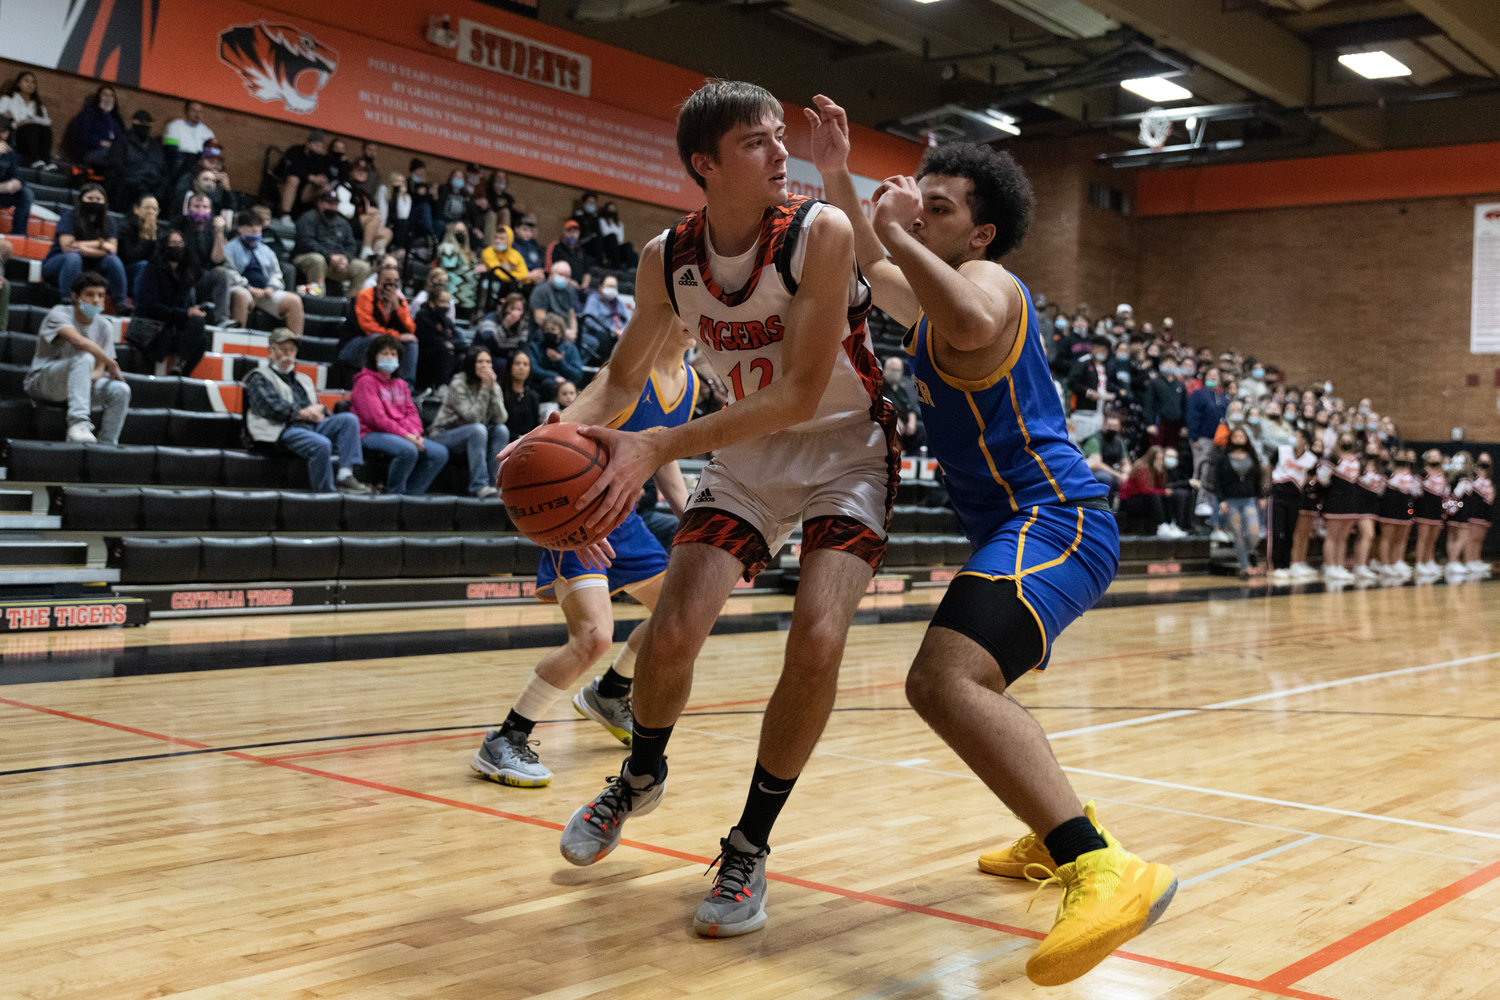 Centralia forward Landon Kaut looks to pass from the post against Rochester Dec. 10.